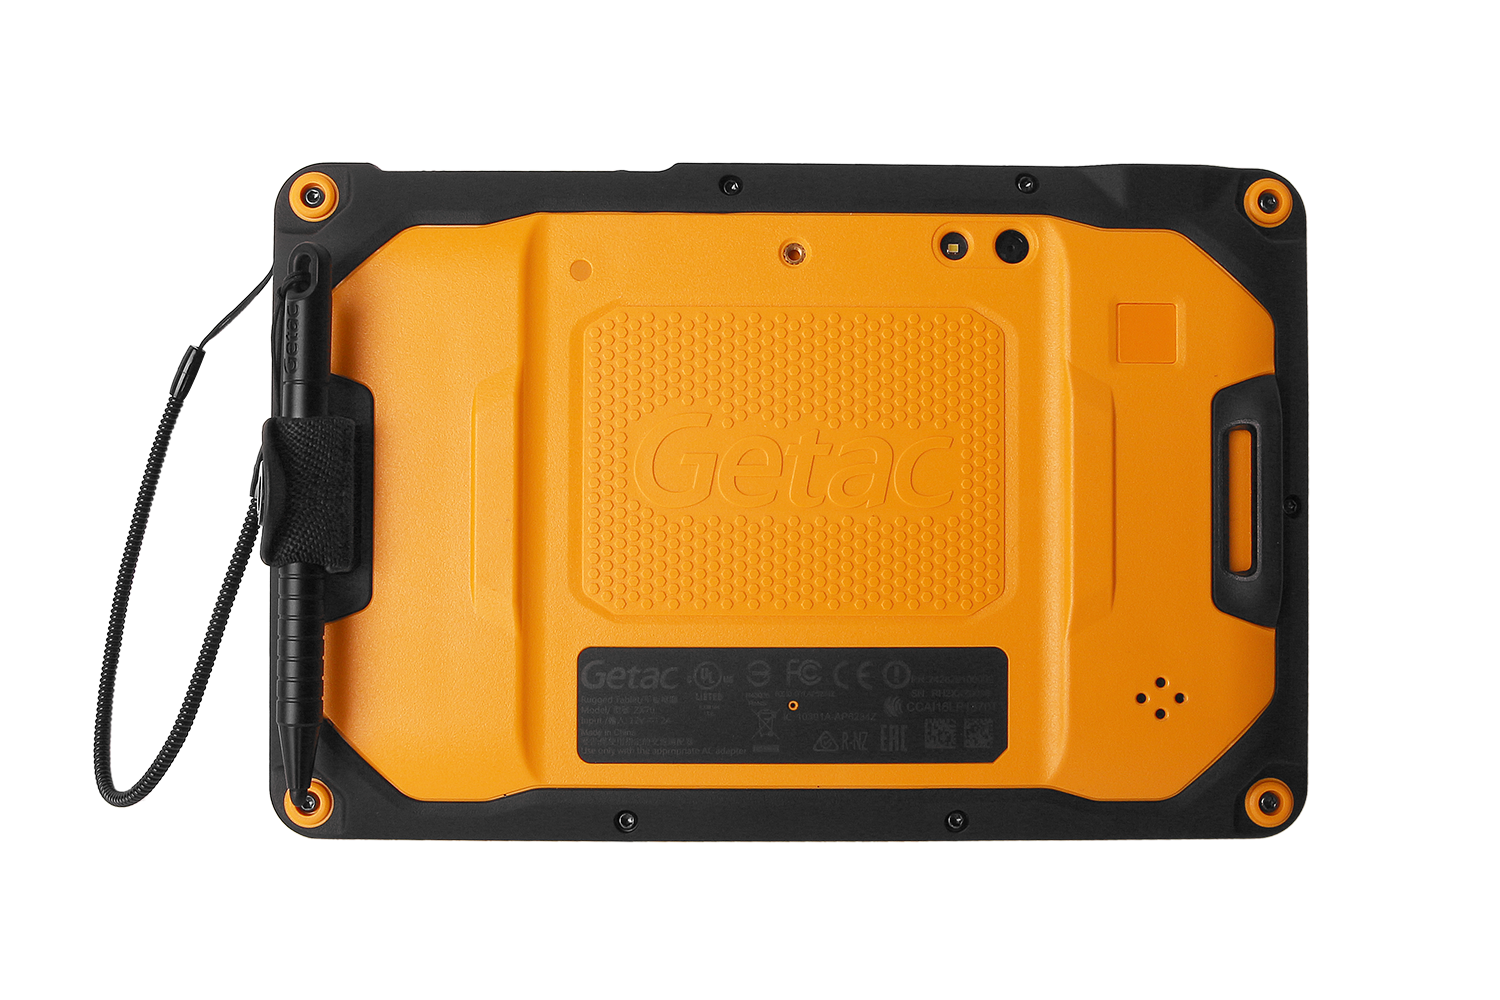 Fully Rugged Getac ZX70 7" showcasing its rugged casing